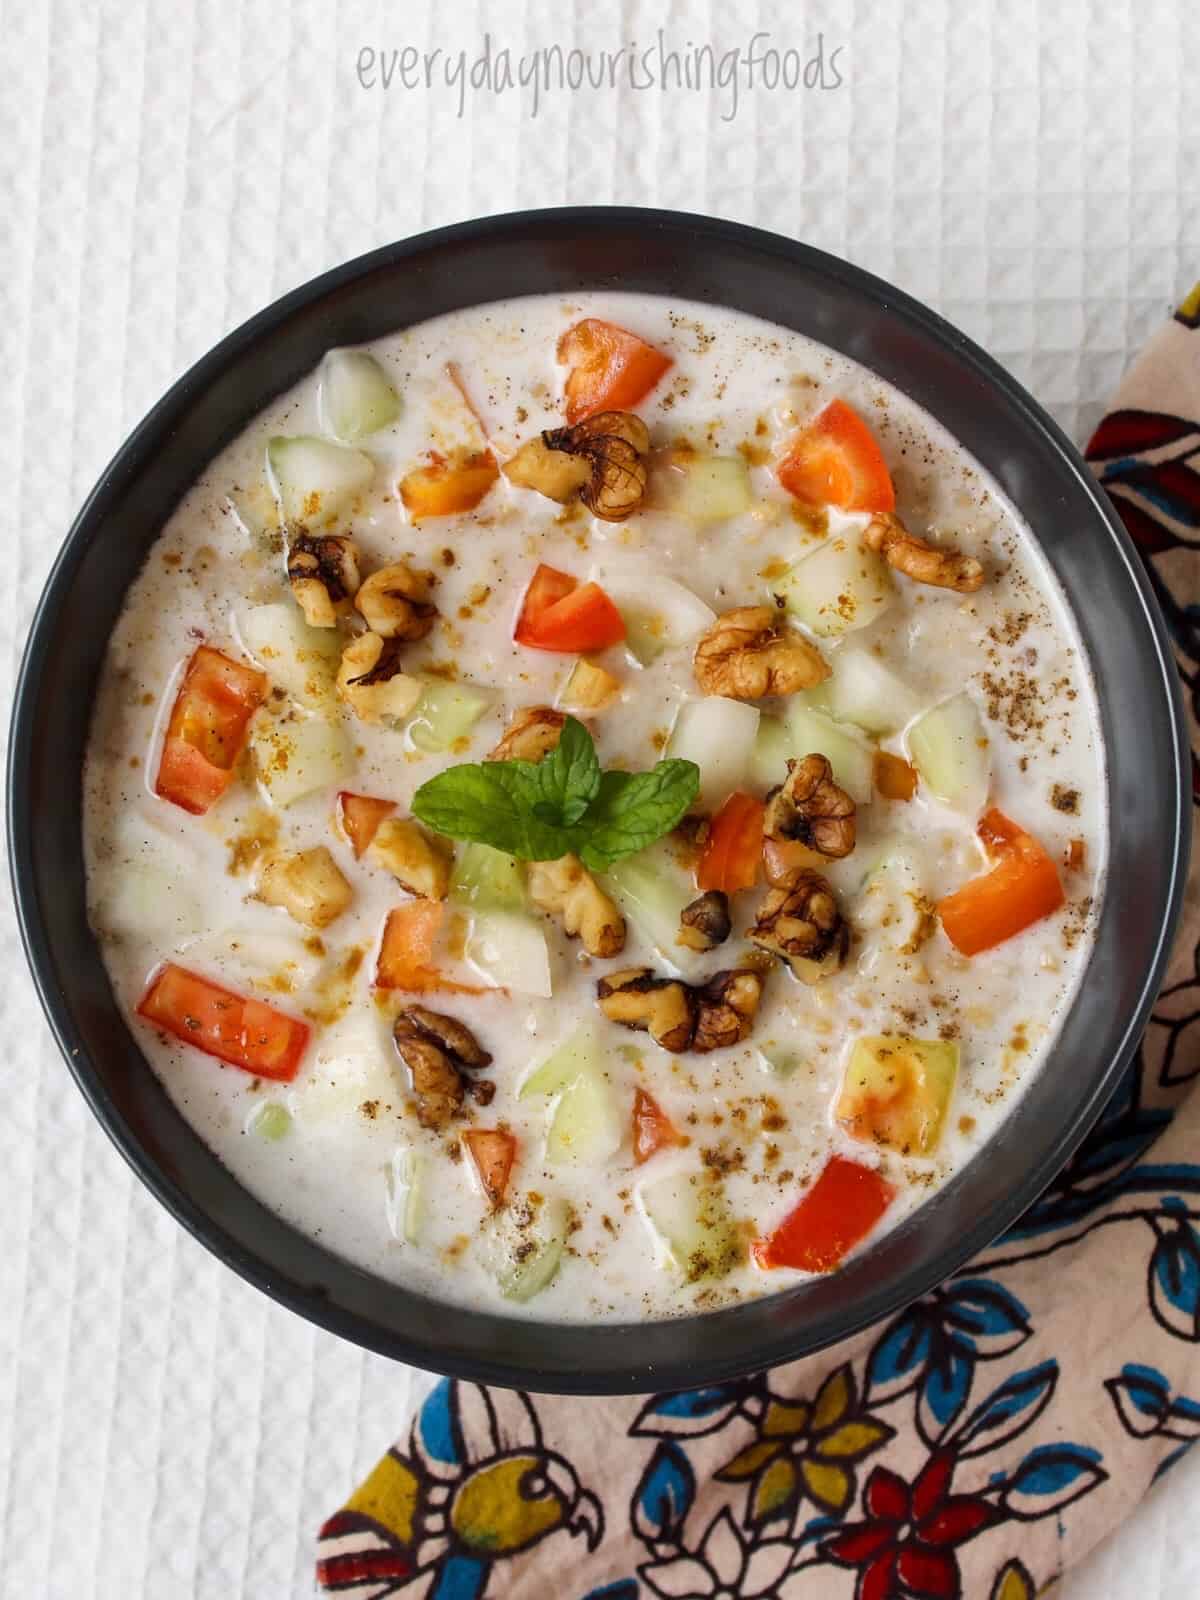 Savory oatmeal with steel cut oats with walnuts, tomatoes, and onions in a bowl.